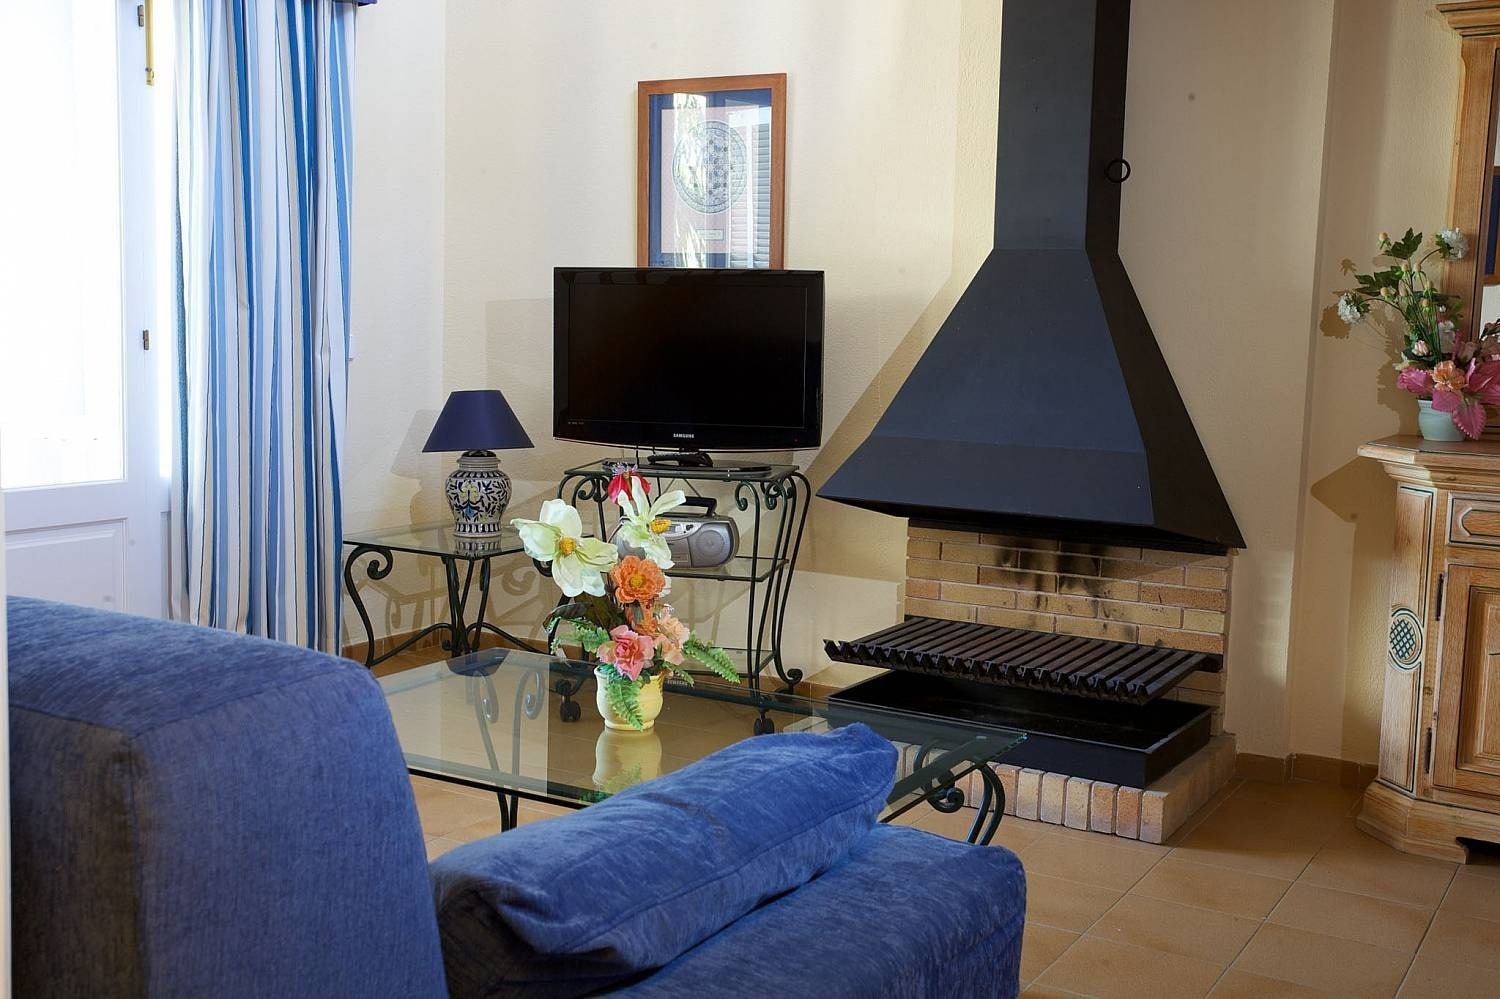 Living room with fireplace at the Ona Cala Pi hotel, in Majorca